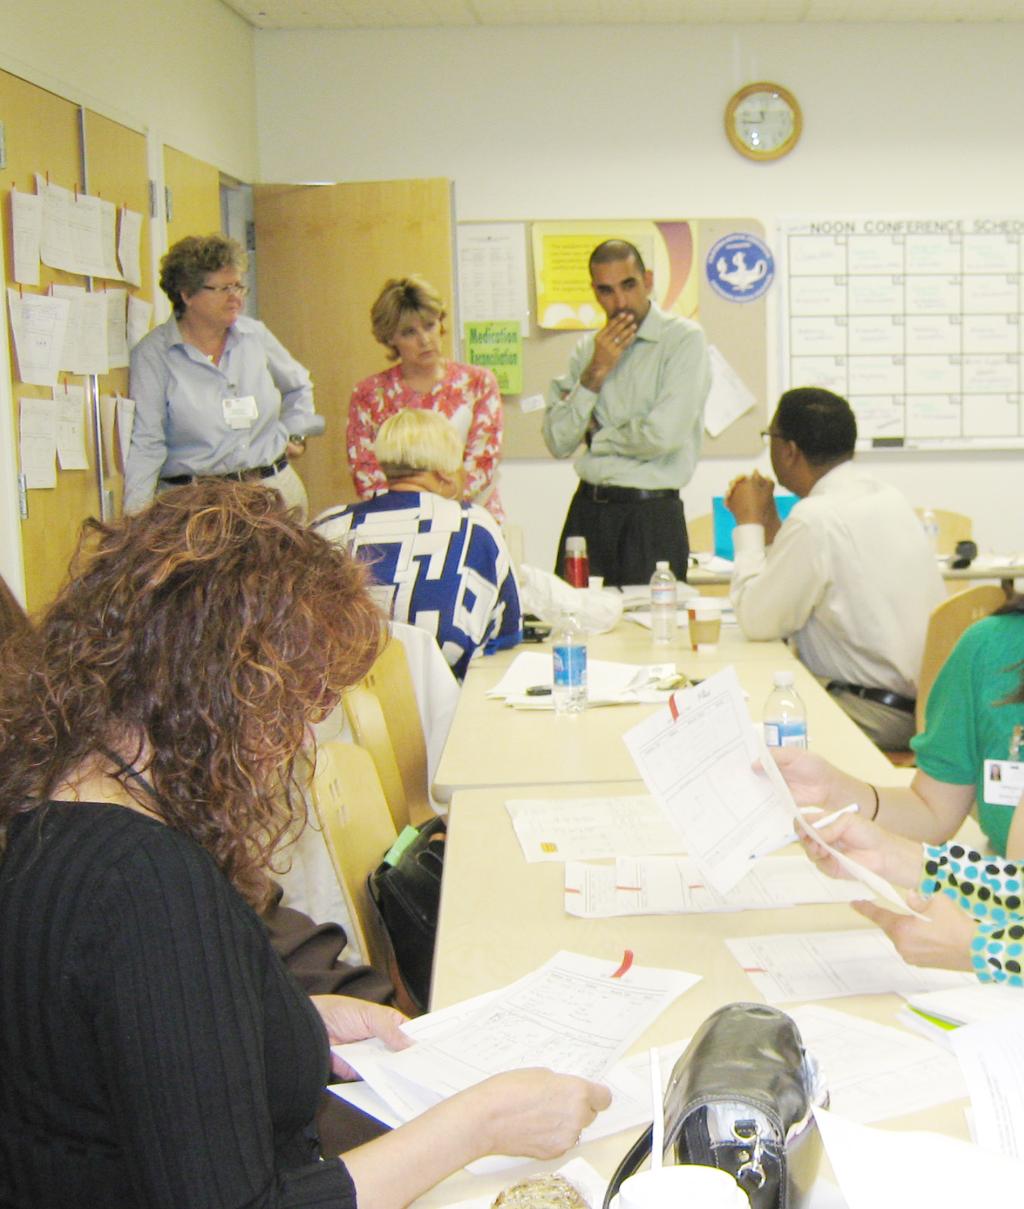 behavioral health kaizen #2 Friday, May 18 th, marked the end of the second Kaizen week focusing on the processes and flow of patients within the Crisis Stabilization Unit (csu).